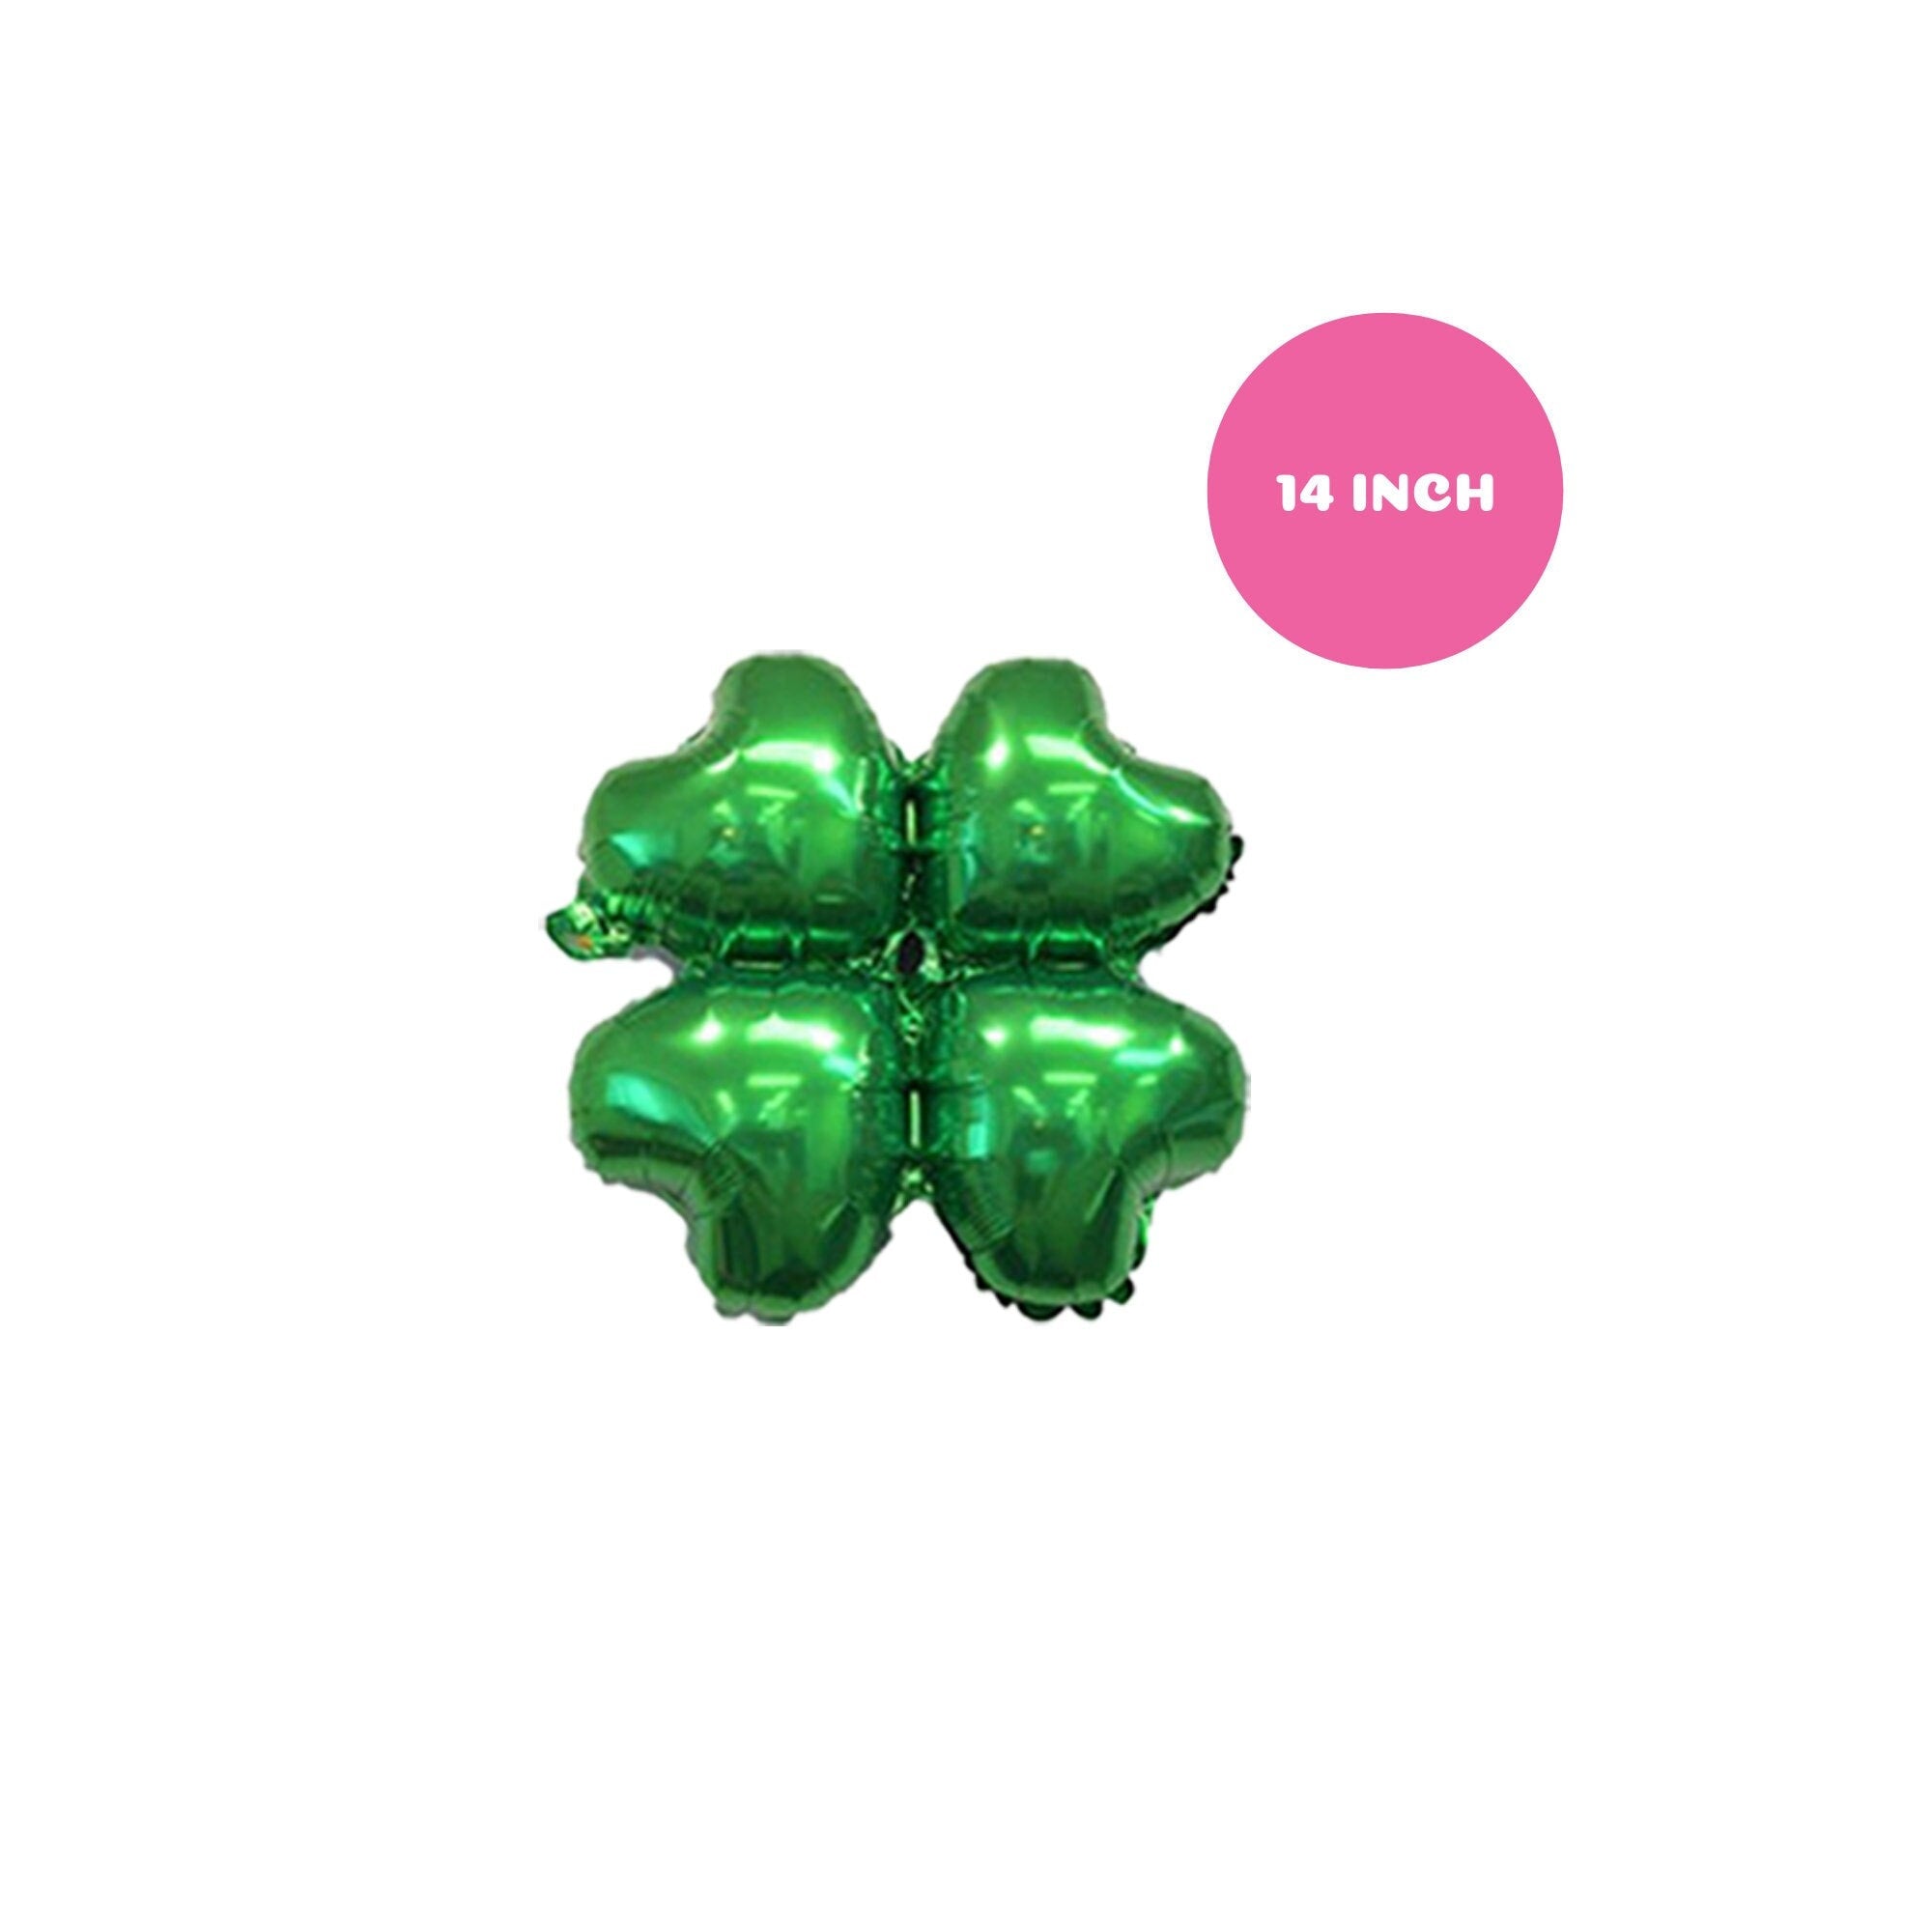 Lucky One St Patricks Day Birthday Party Balloon Decorations | 1st Birthday Party St Patricks Day | First 1st Birthday Decor St Patricks Day